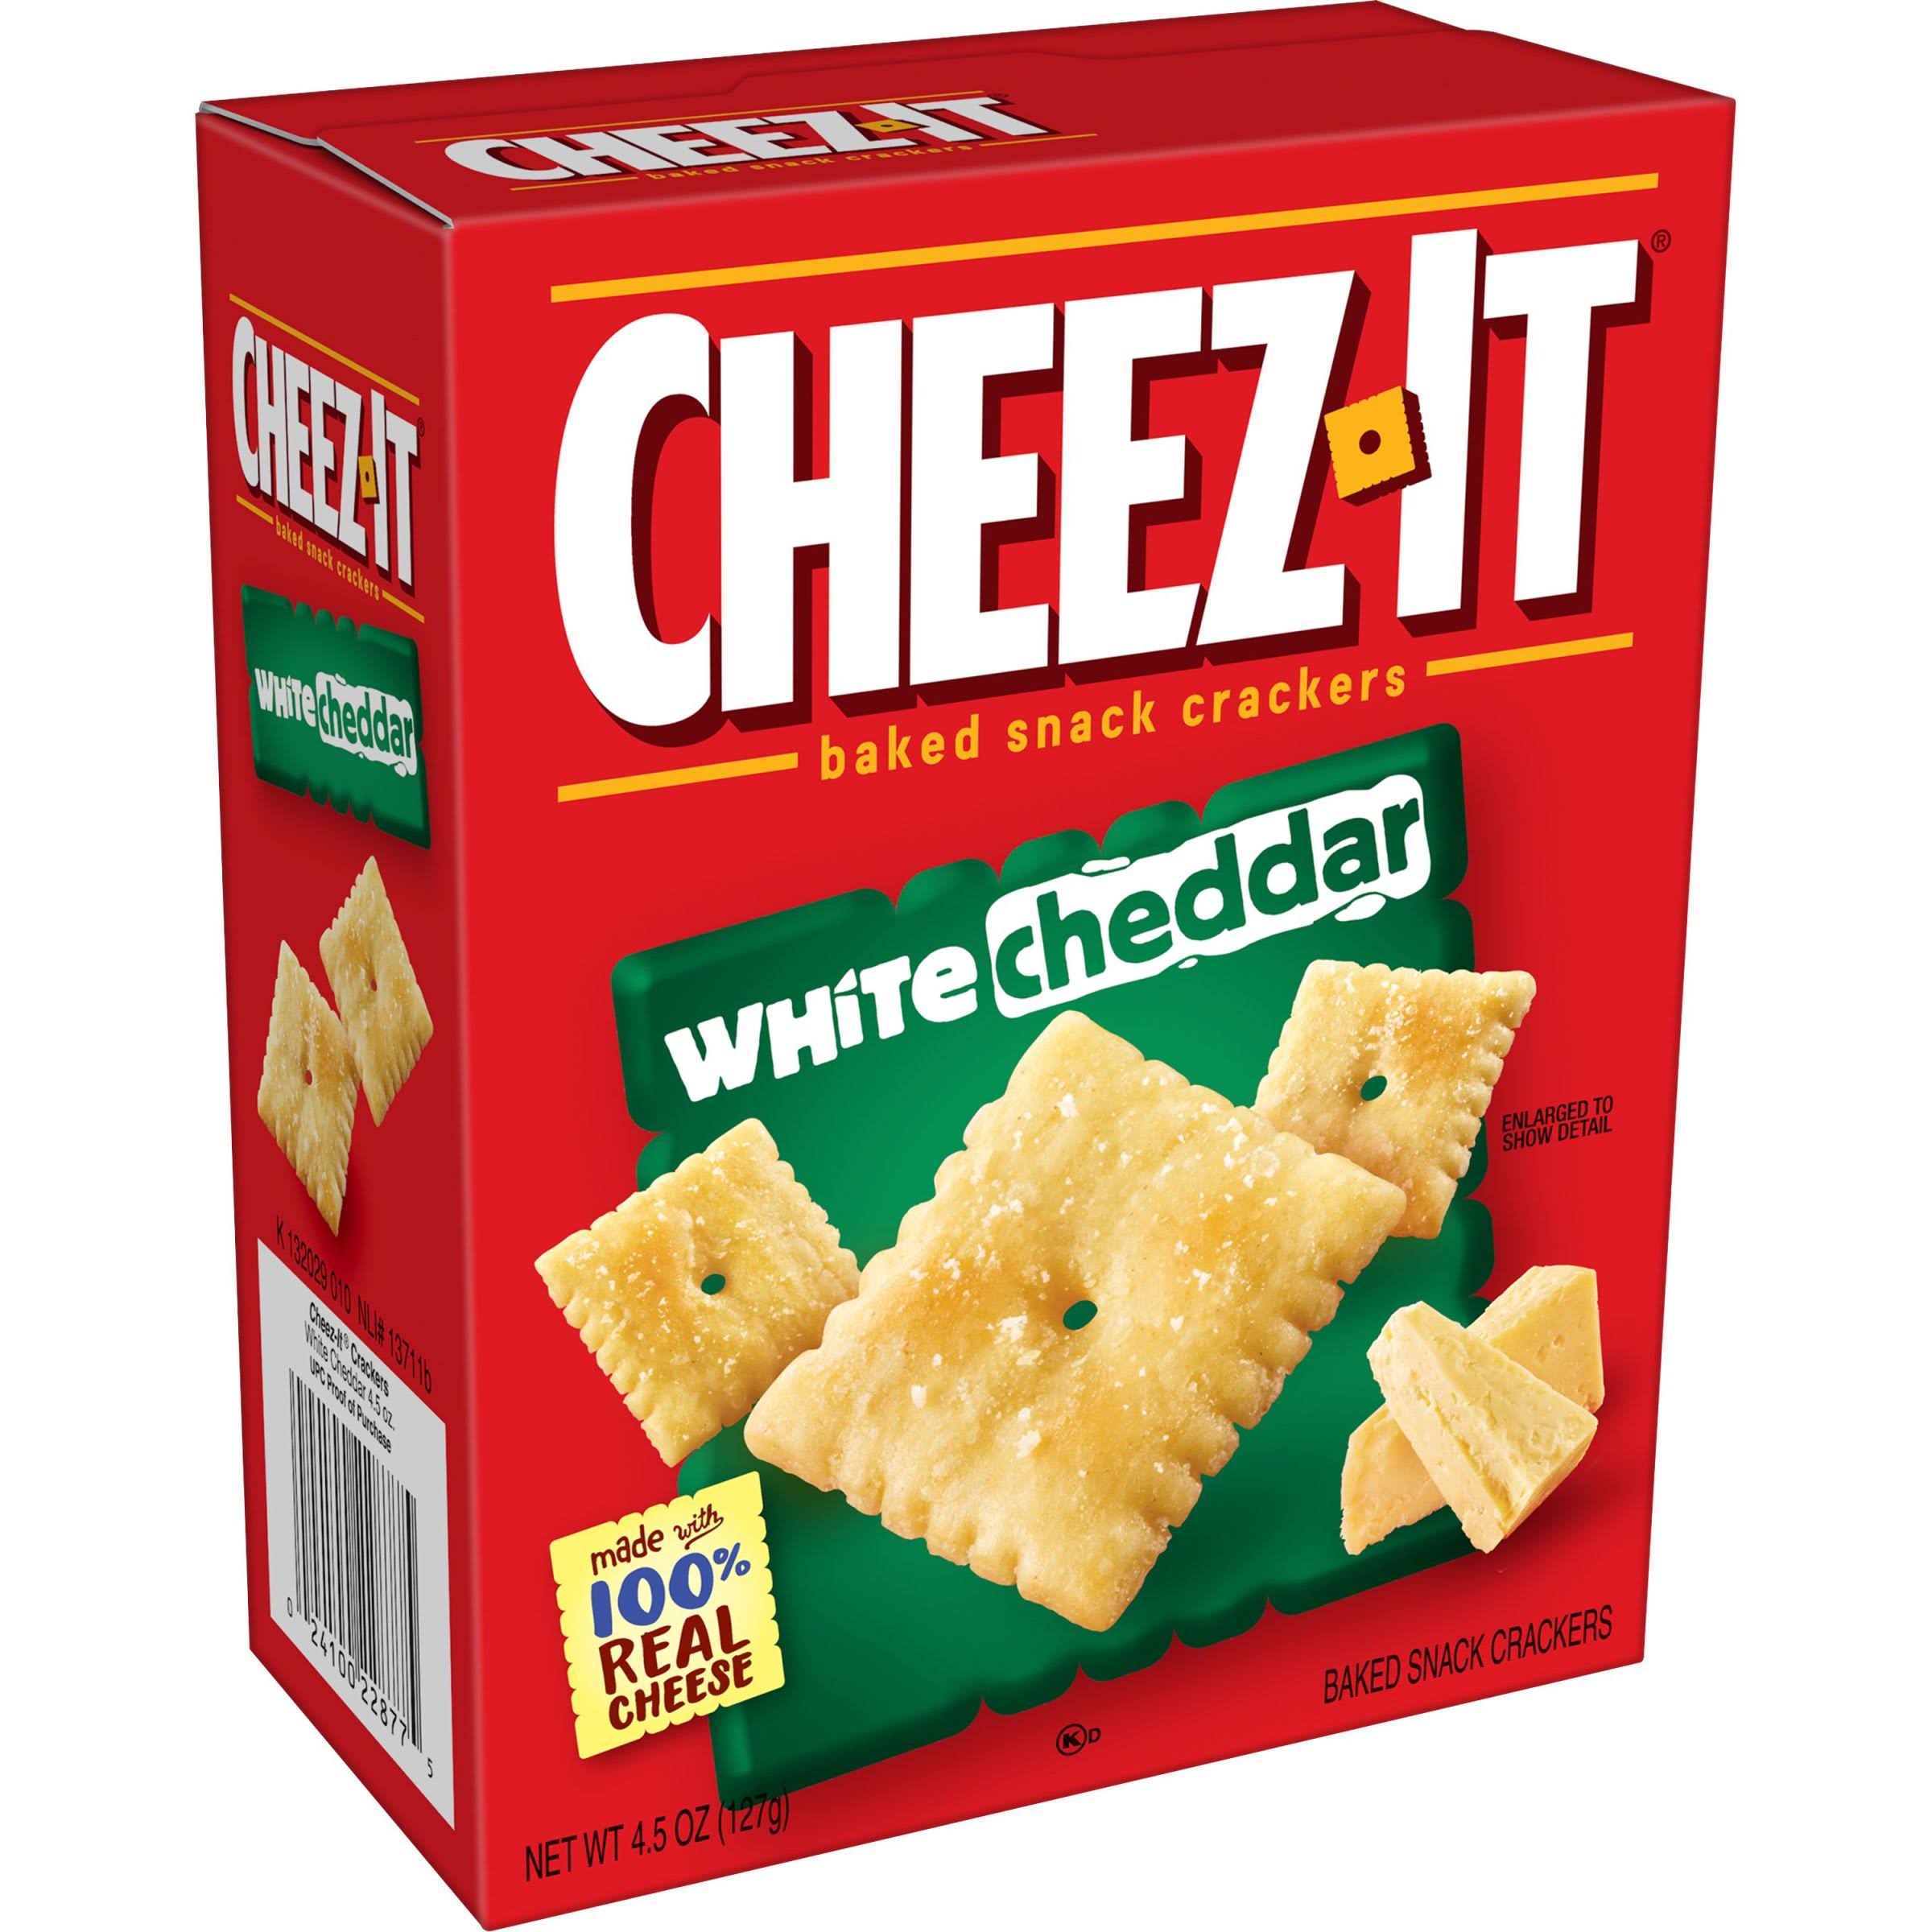 Cheez-it Baked Snack Crackers - White Cheddar, 4.5oz